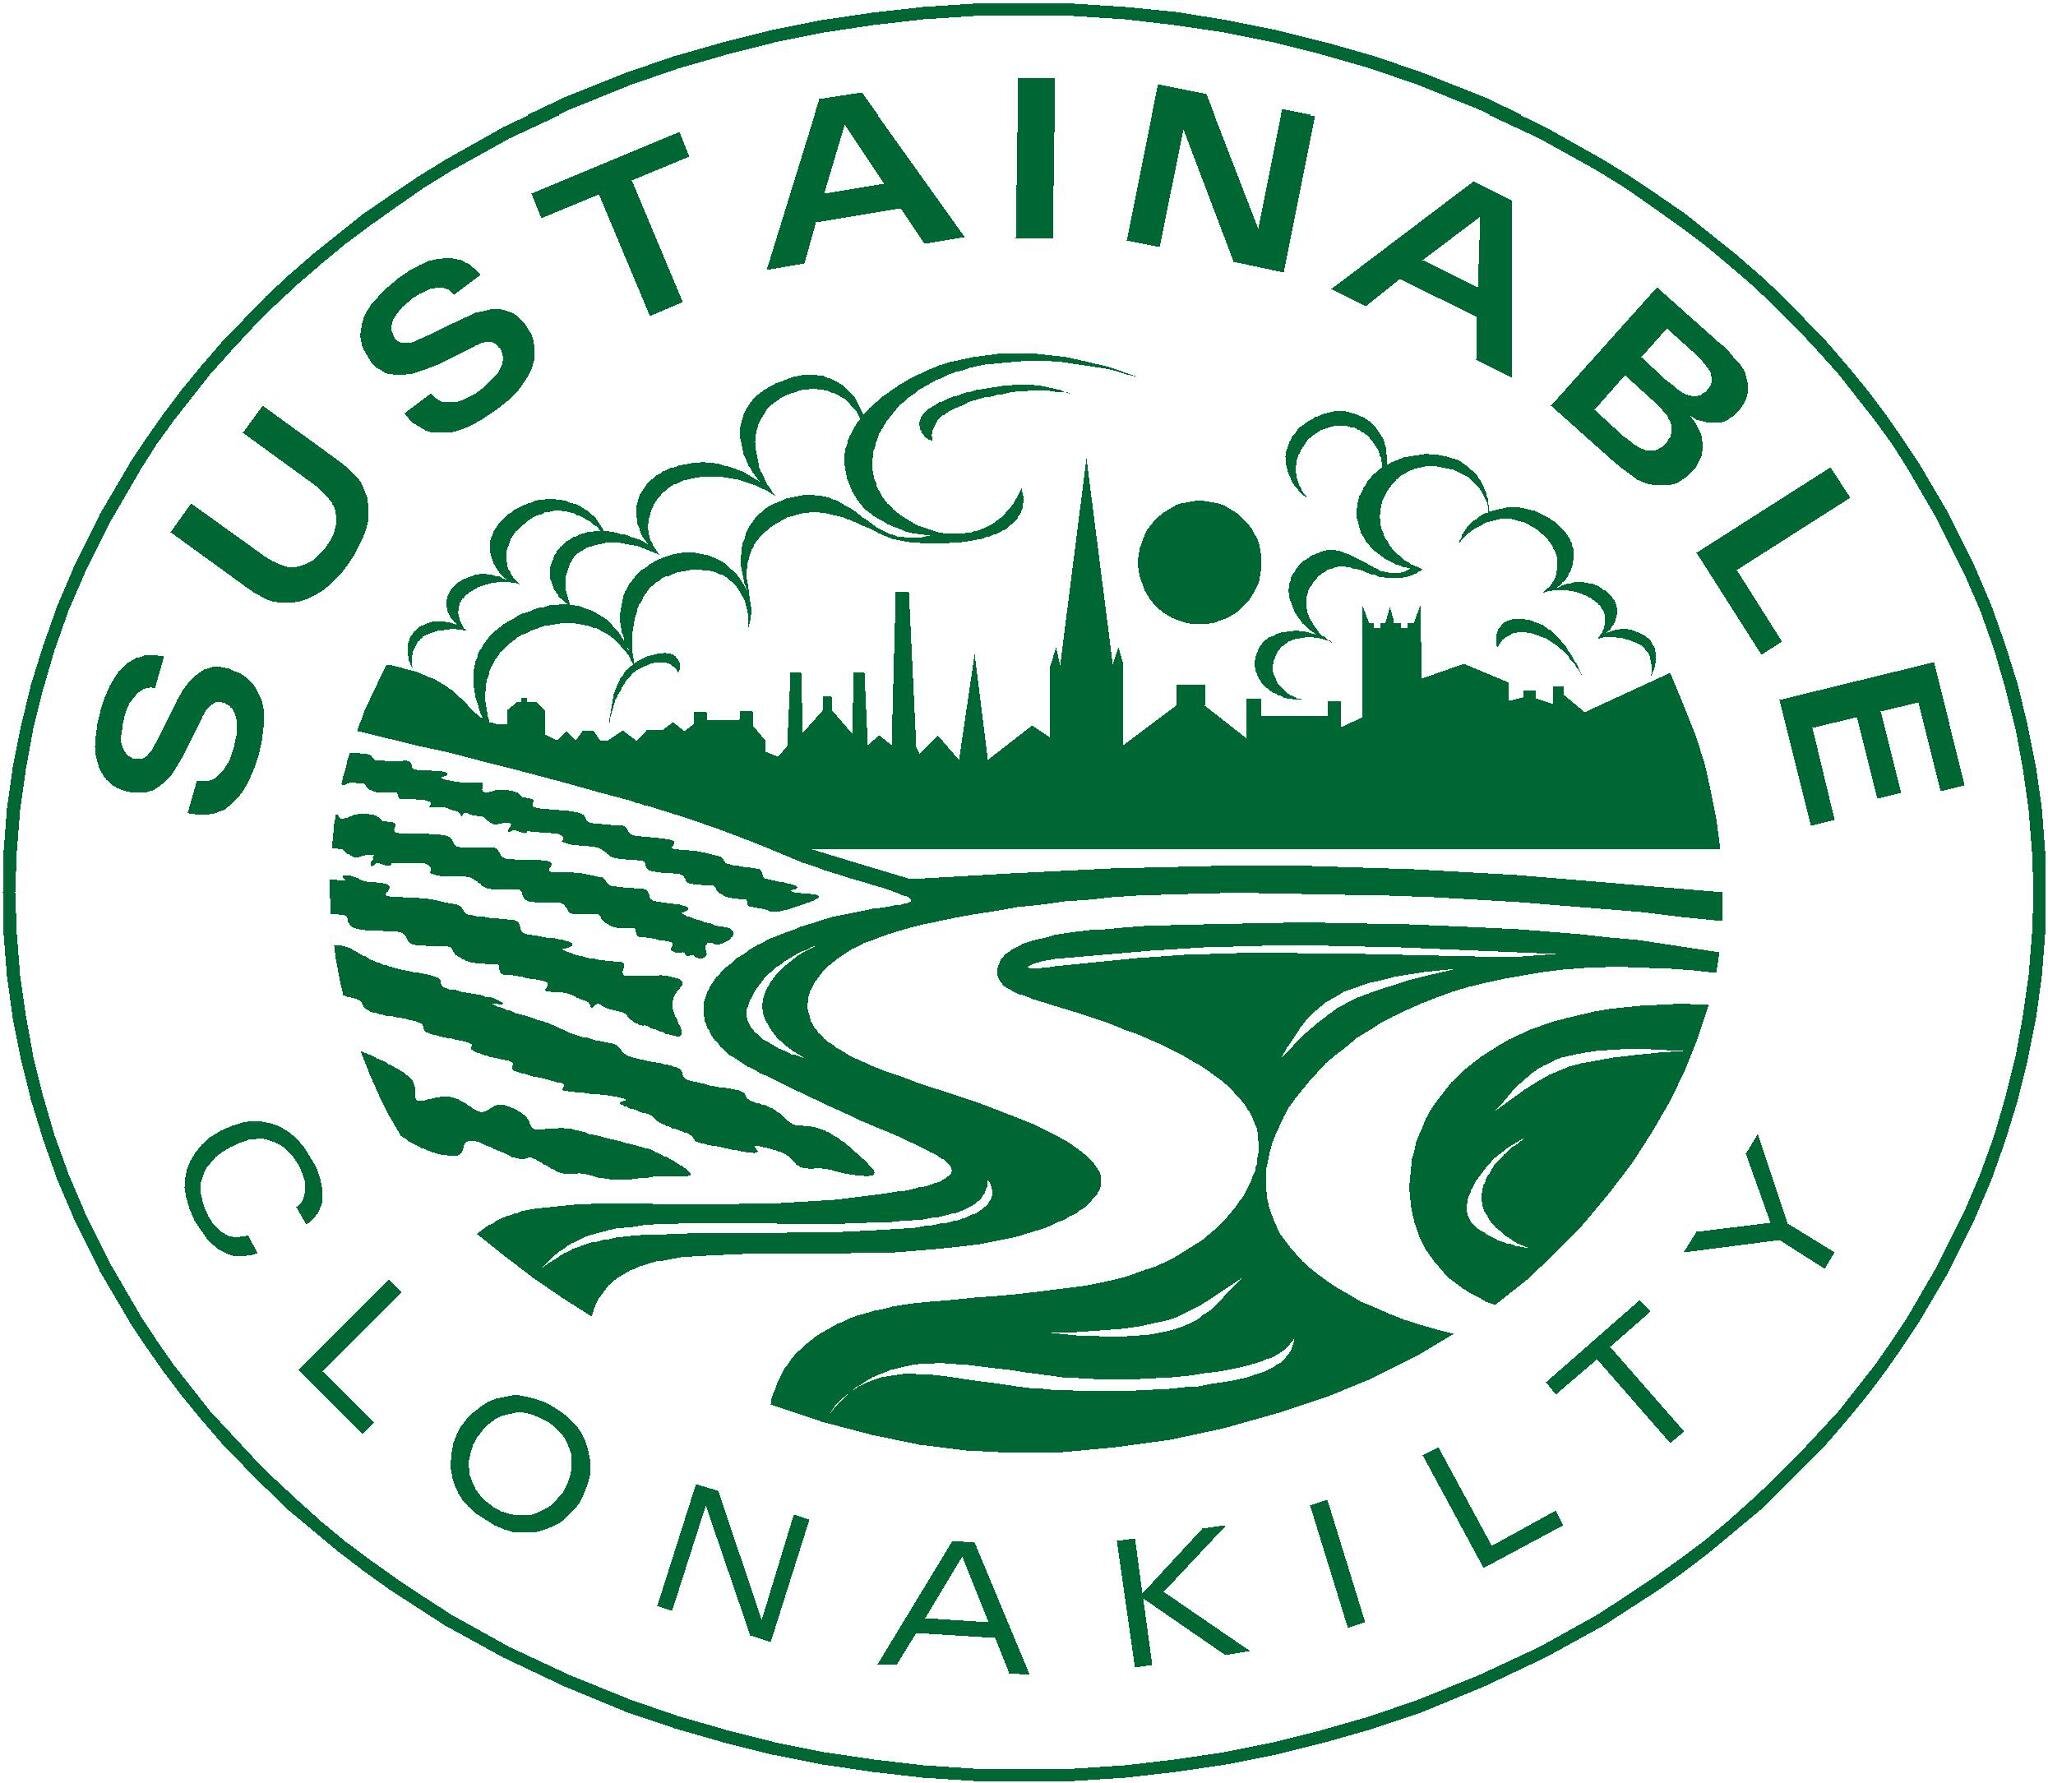 Environmental Group in Clonakilty, West Cork. Aim to become Energy Neutral.
https://t.co/iCrMabLQKt